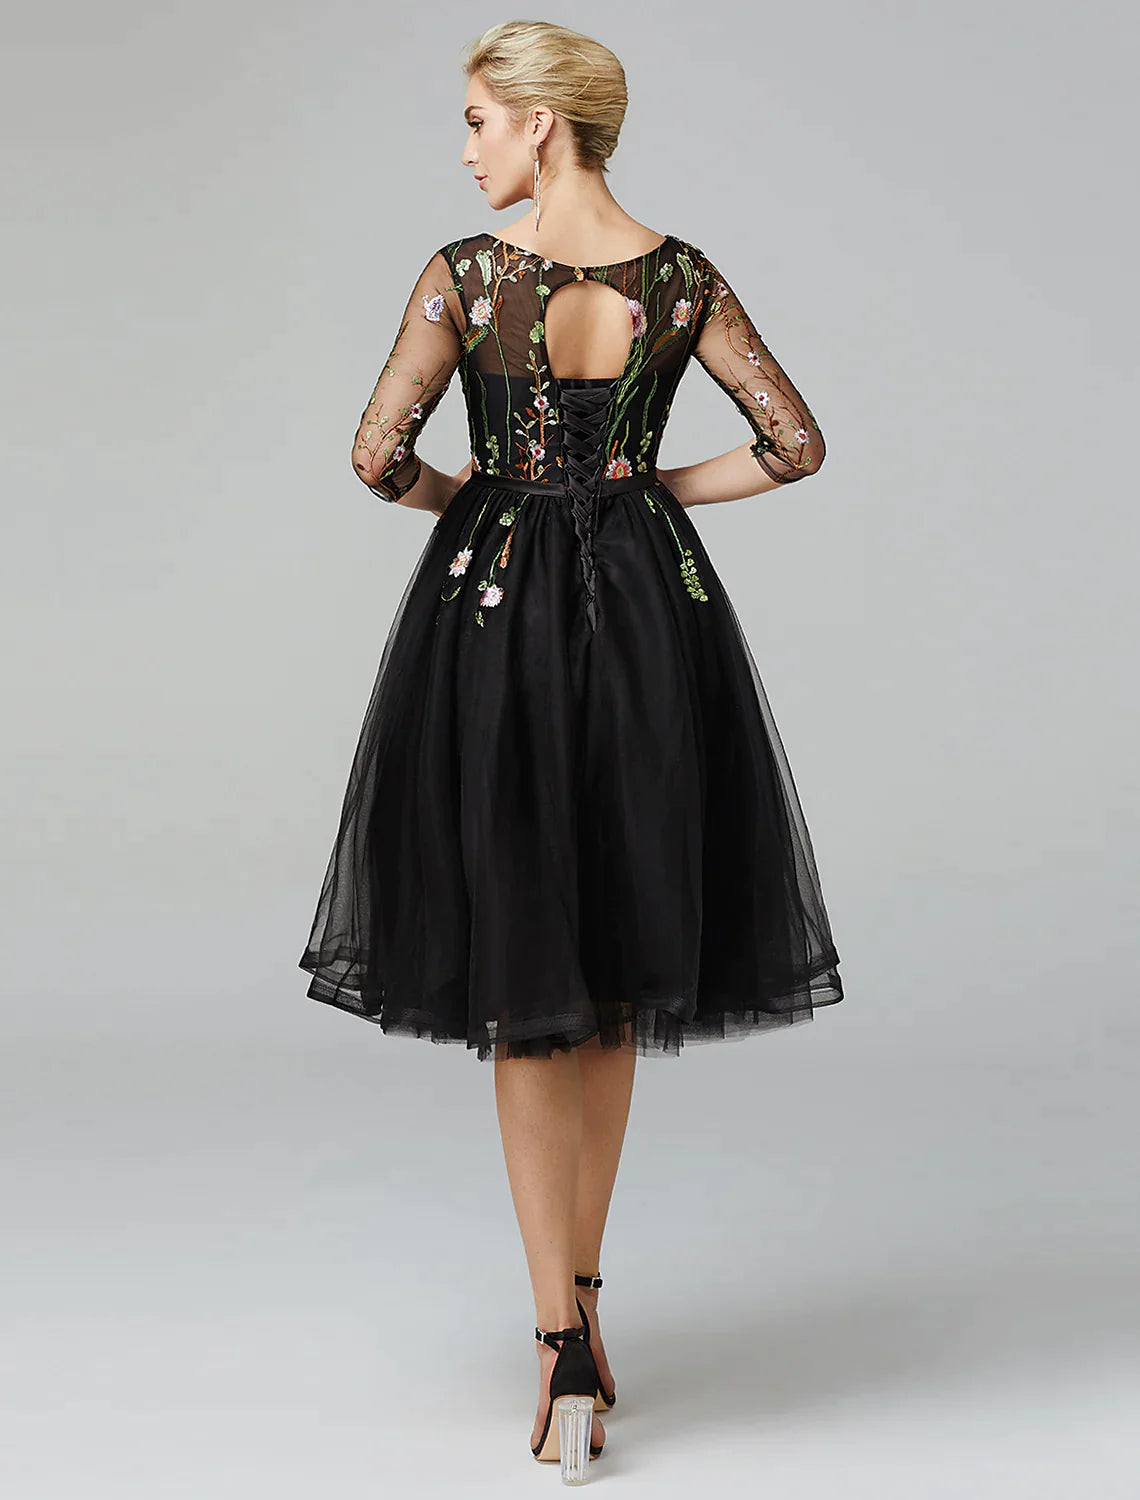 A-Line Little Black Dress Dress Wedding Guest Knee Length Long Sleeve Neck Addams Tulle with Embroidery Appliques